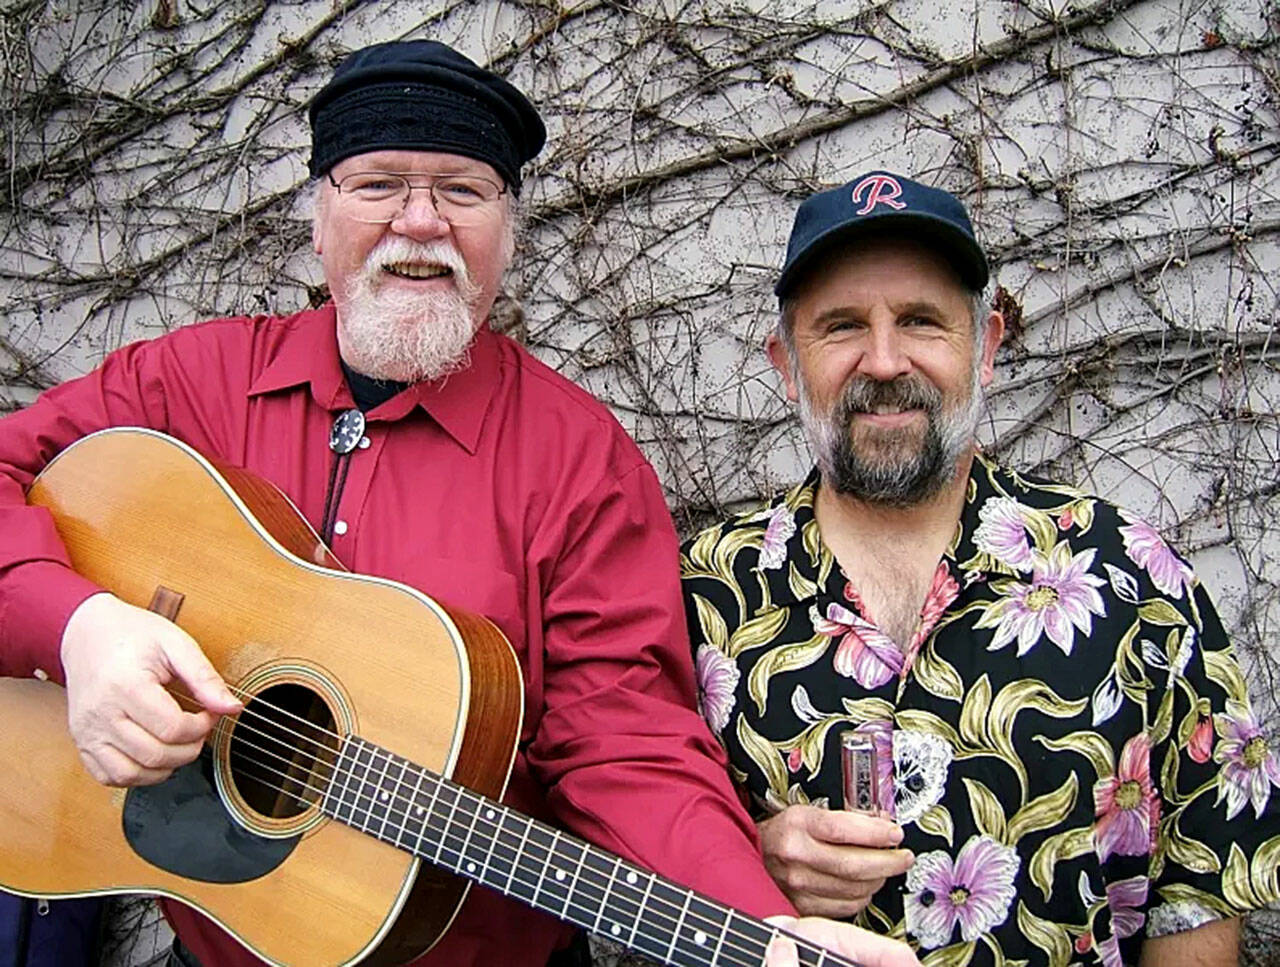 (Scott Herrick Photo) Kings of Mongrel Folk, comprised of Orville Johnson (left) and Mark Graham (right), is slated to perform at “Isle to Isle,” a fundraiser bash for Haiti on Saturday, May 14.